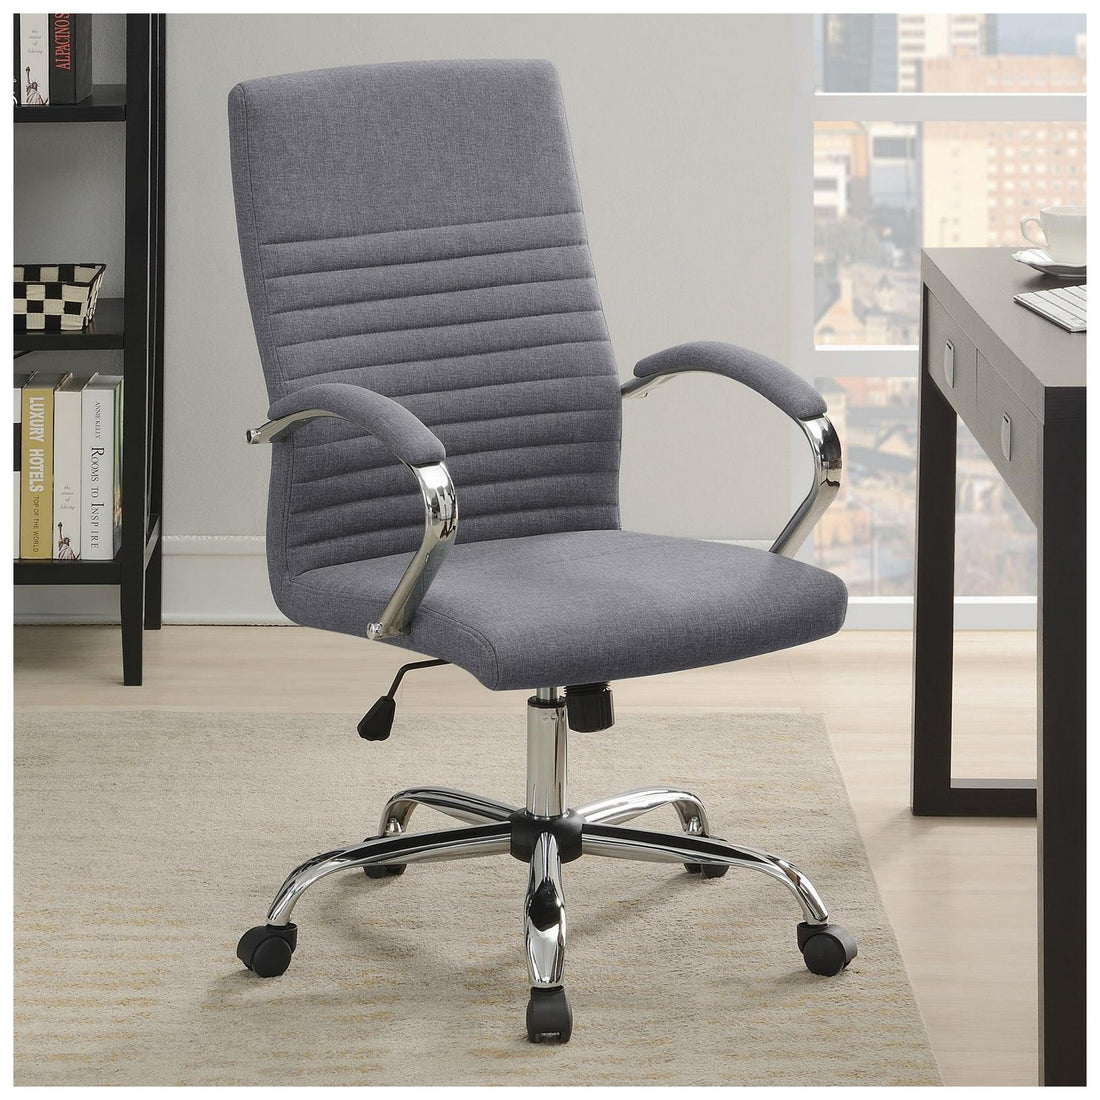 Abisko Upholstered Office Chair with Casters Grey and Chrome 881217